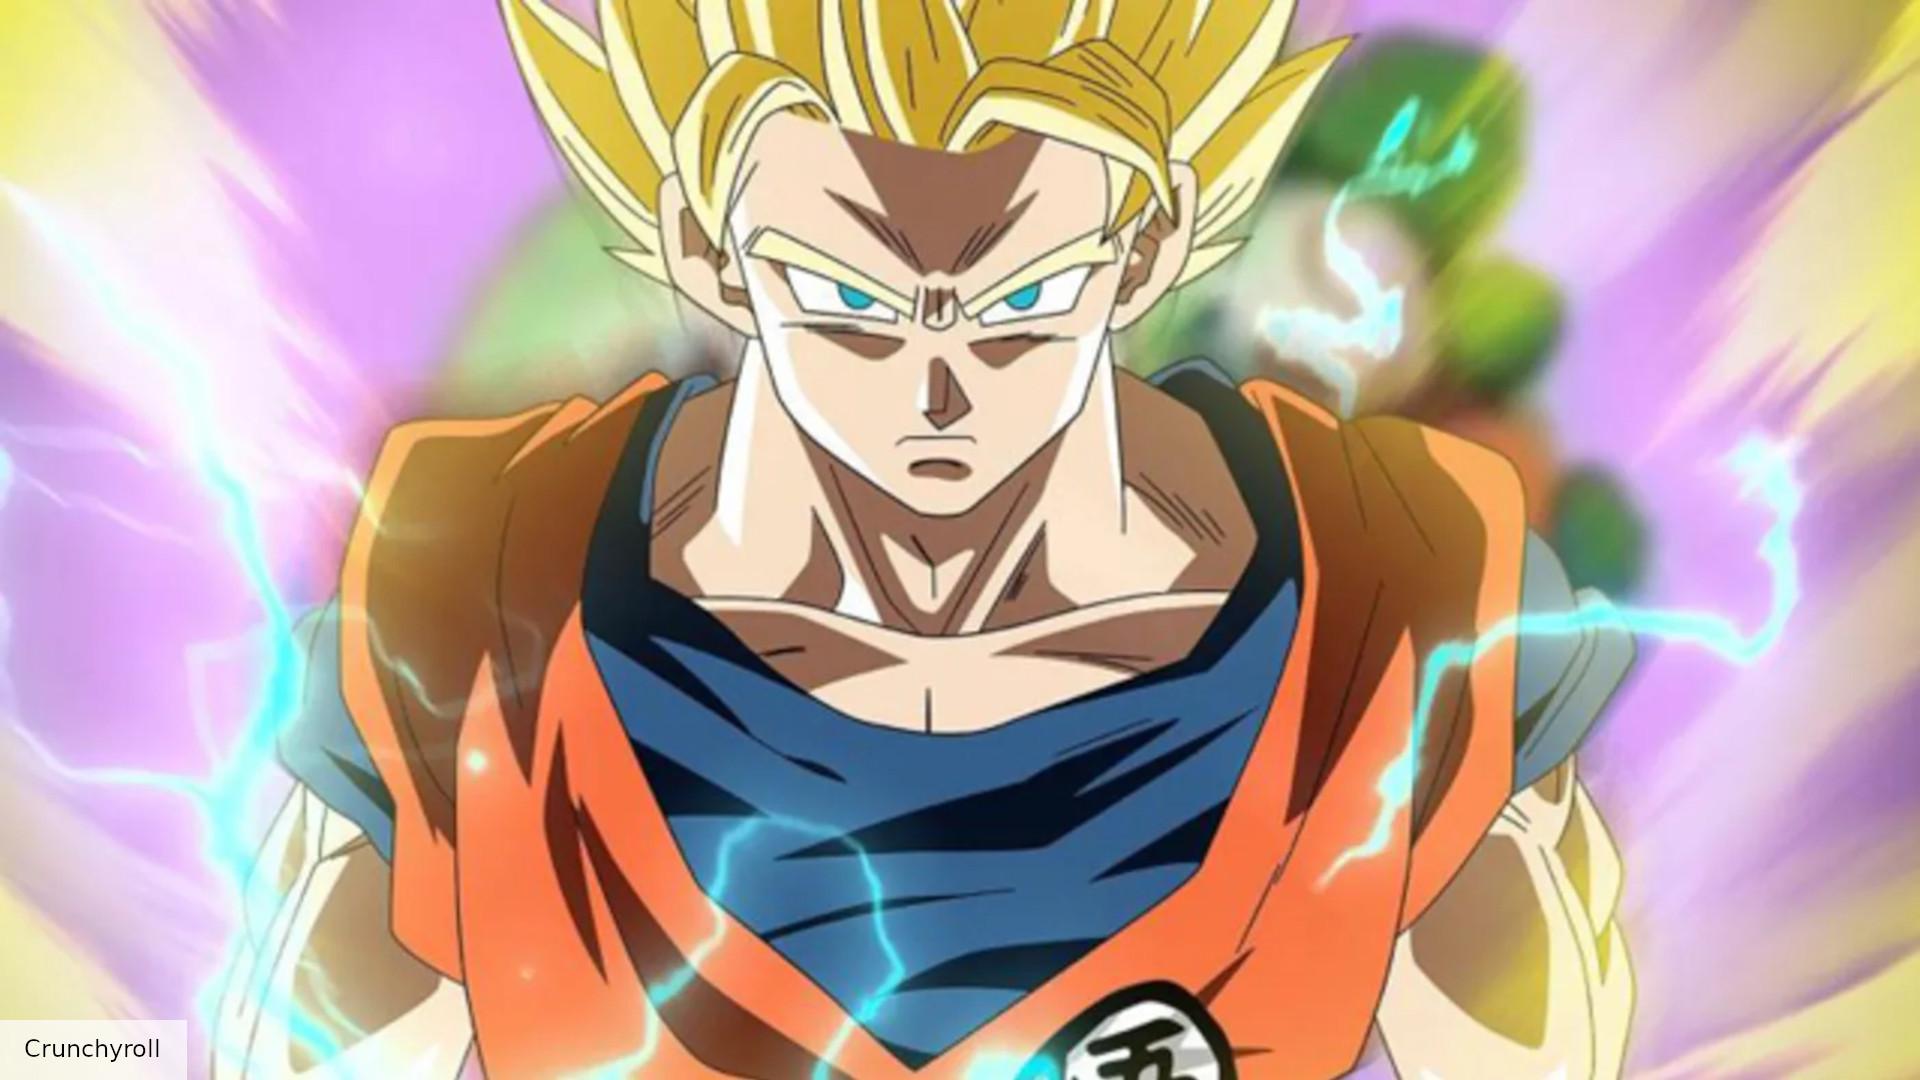 What chapter should I start in the DBS manga? I've finished the anime and  the Broly movie. - Quora